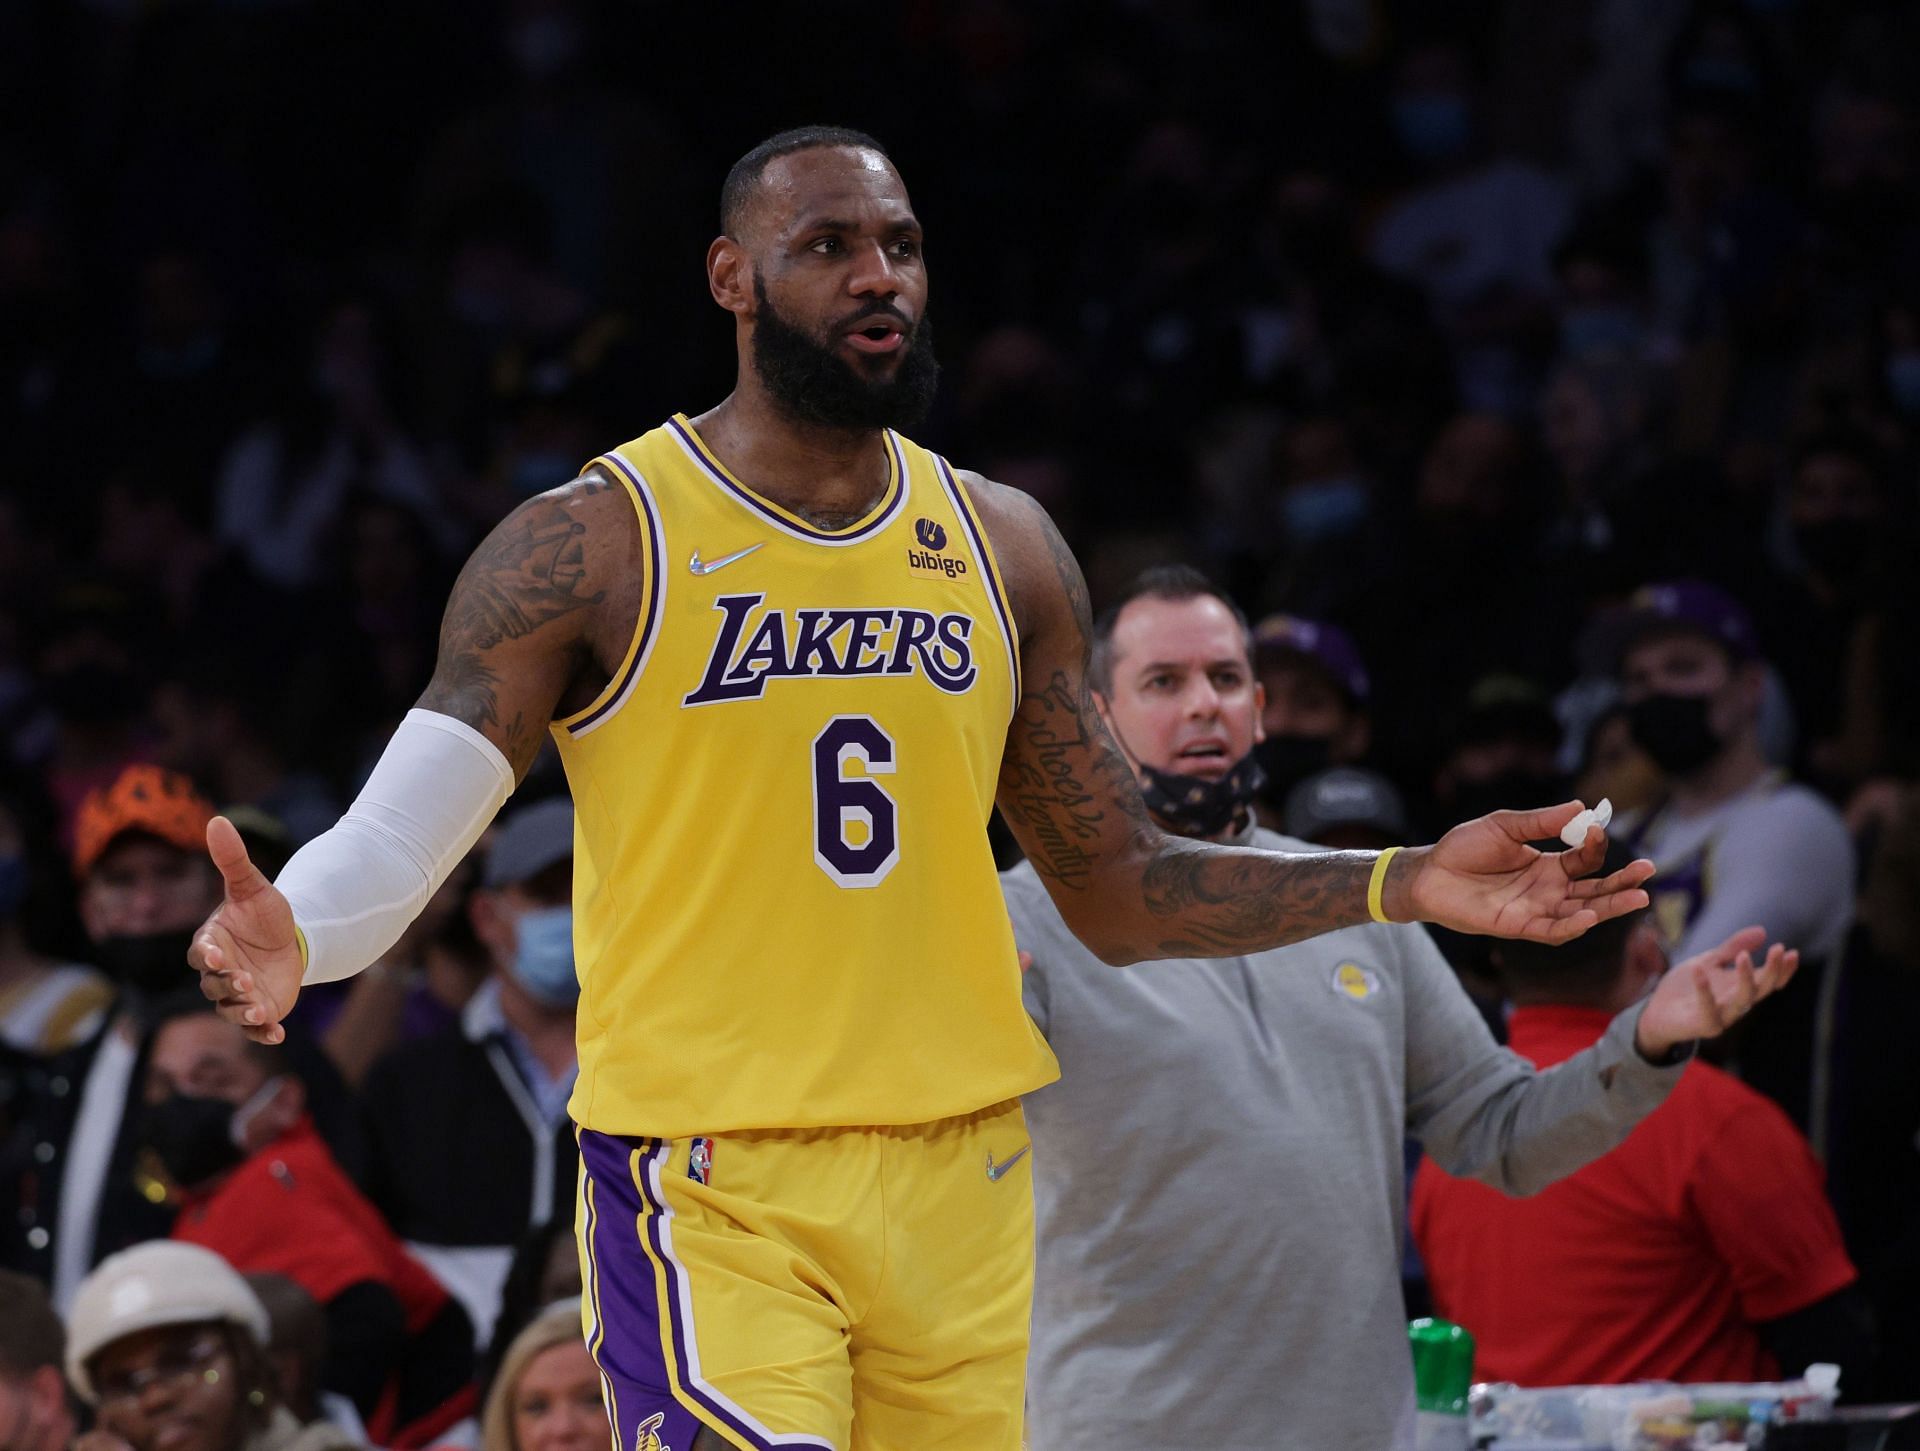 LeBron James takes over late in the game for the LA Lakers.